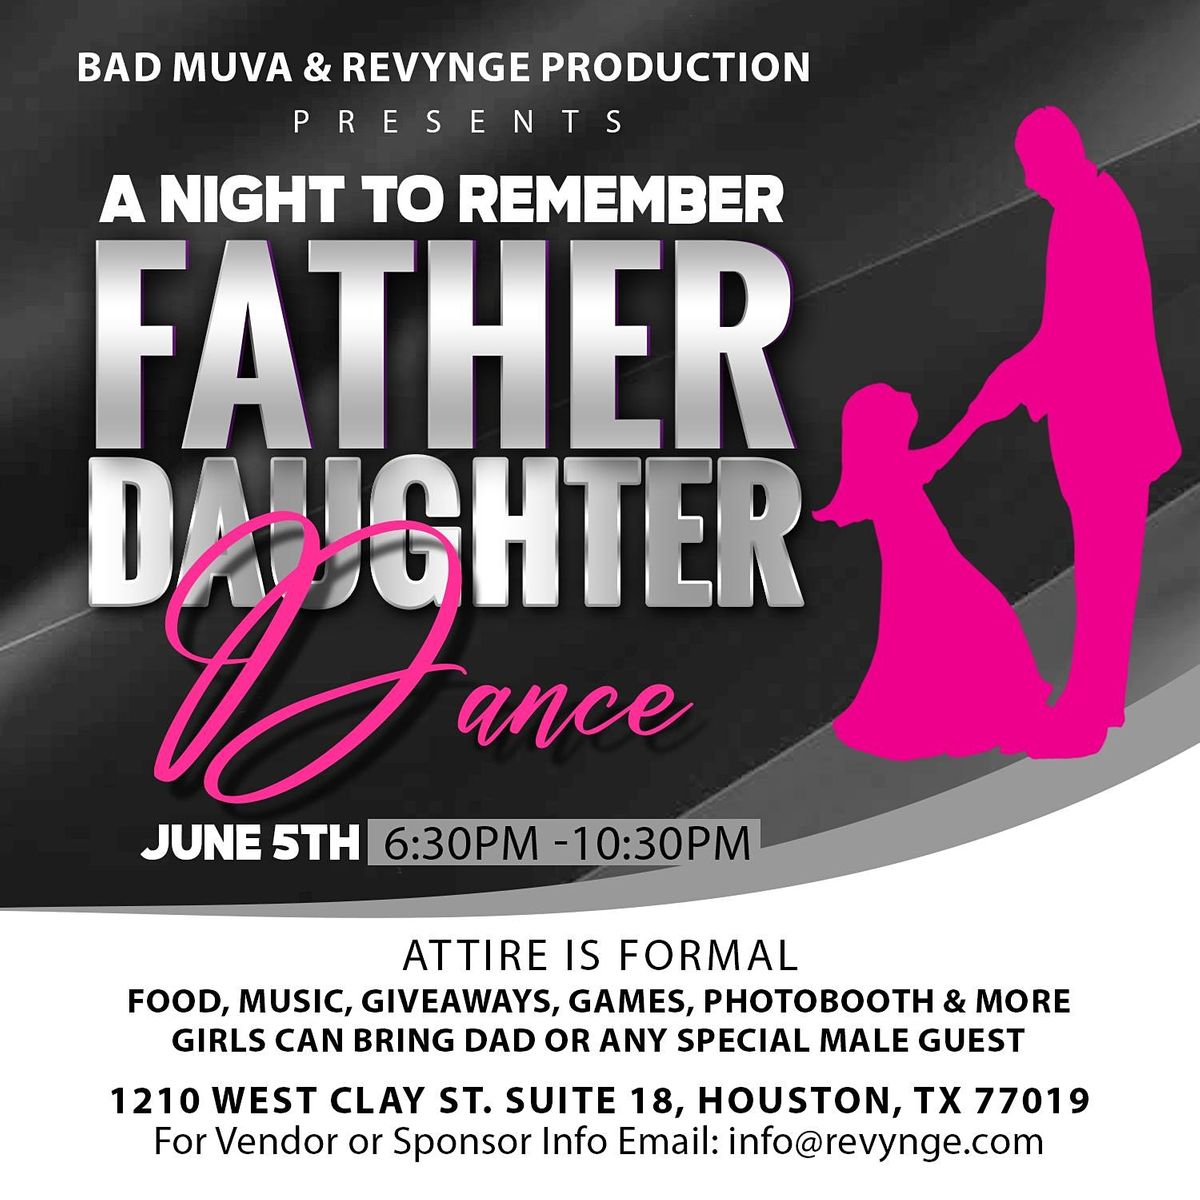 A Night to Remember Father Daughter Dance